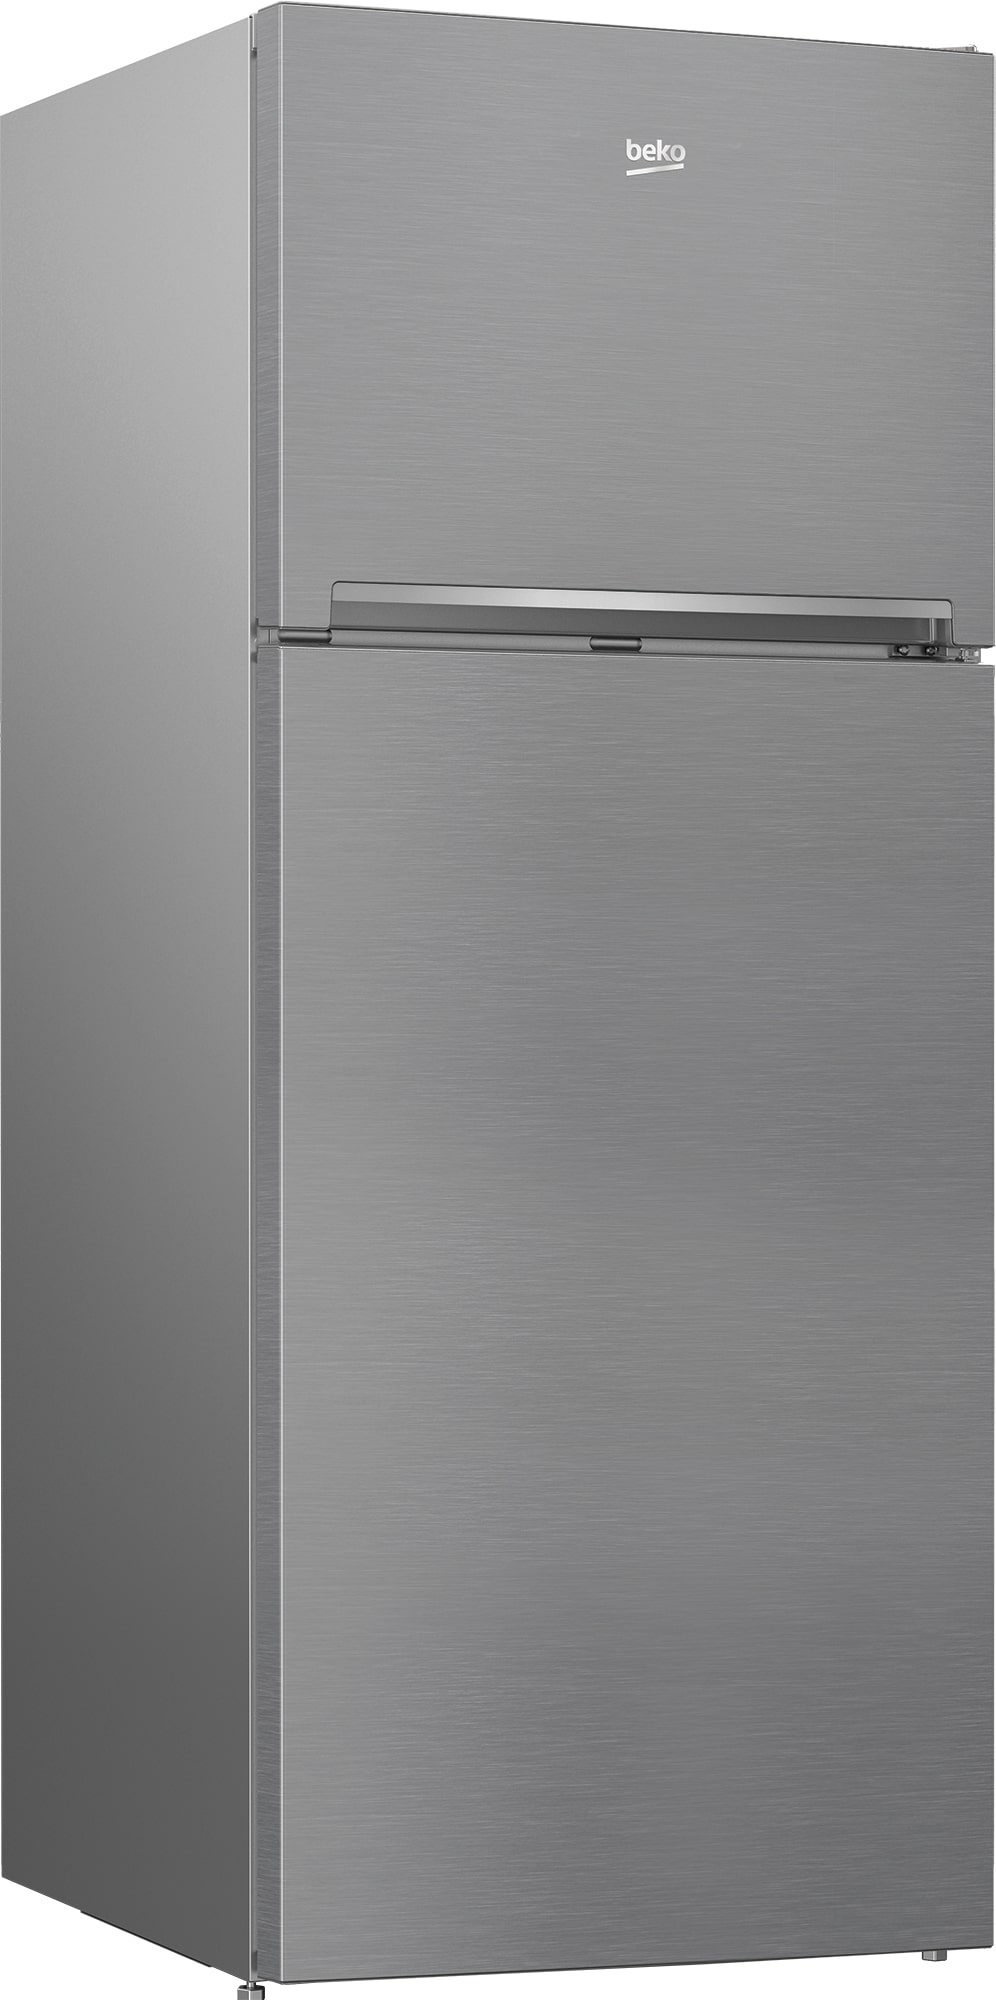 Refrigerator with Top Freezer 490L from Beko